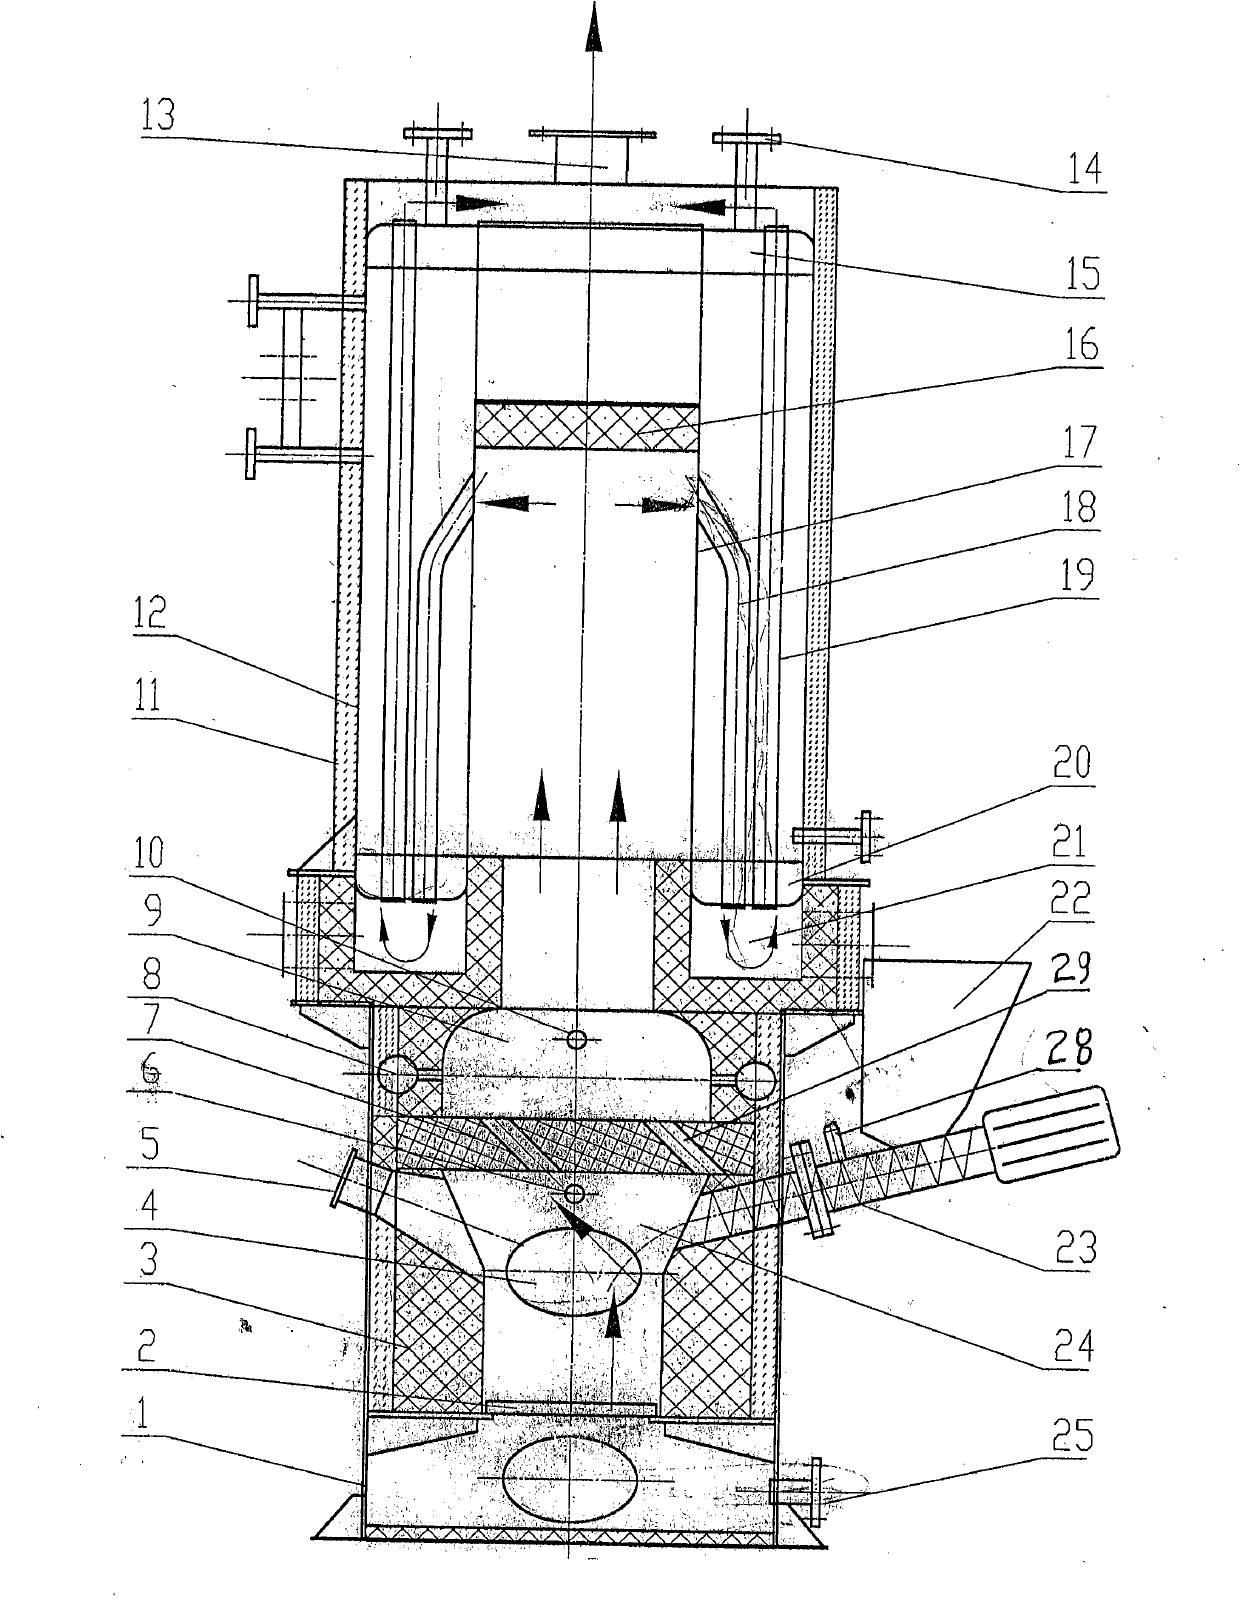 Vertical environment-friendly boiler for triple dedusting burning wood and biological particle fuel in boiler